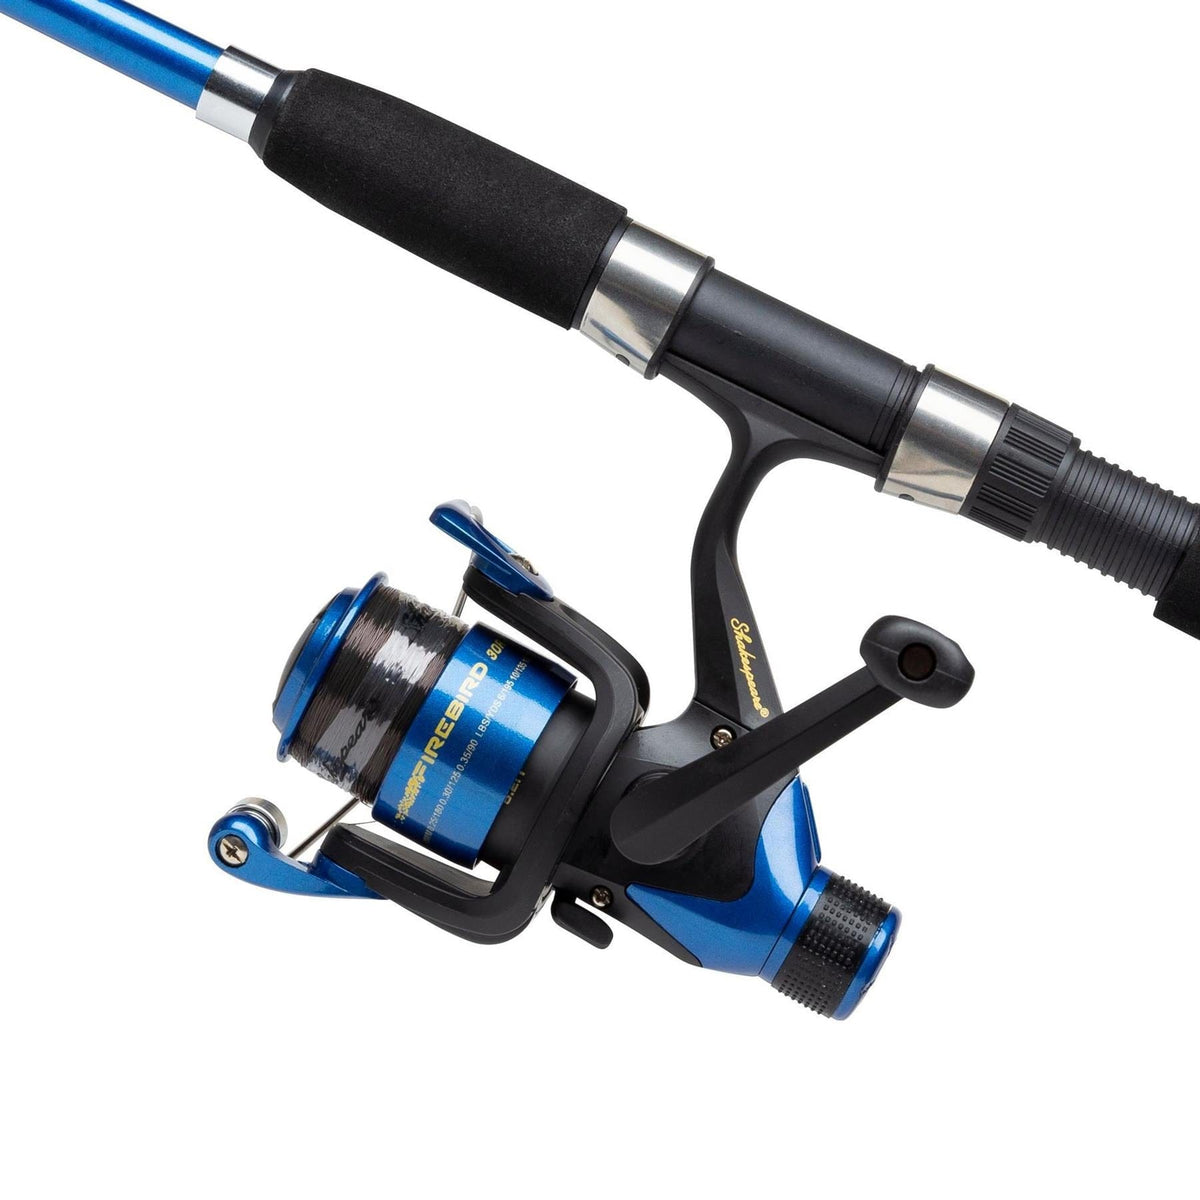 Shakespeare Firebird Tele Spin Combo Rod and Reel with Line - 8ft - 15-35g NEW